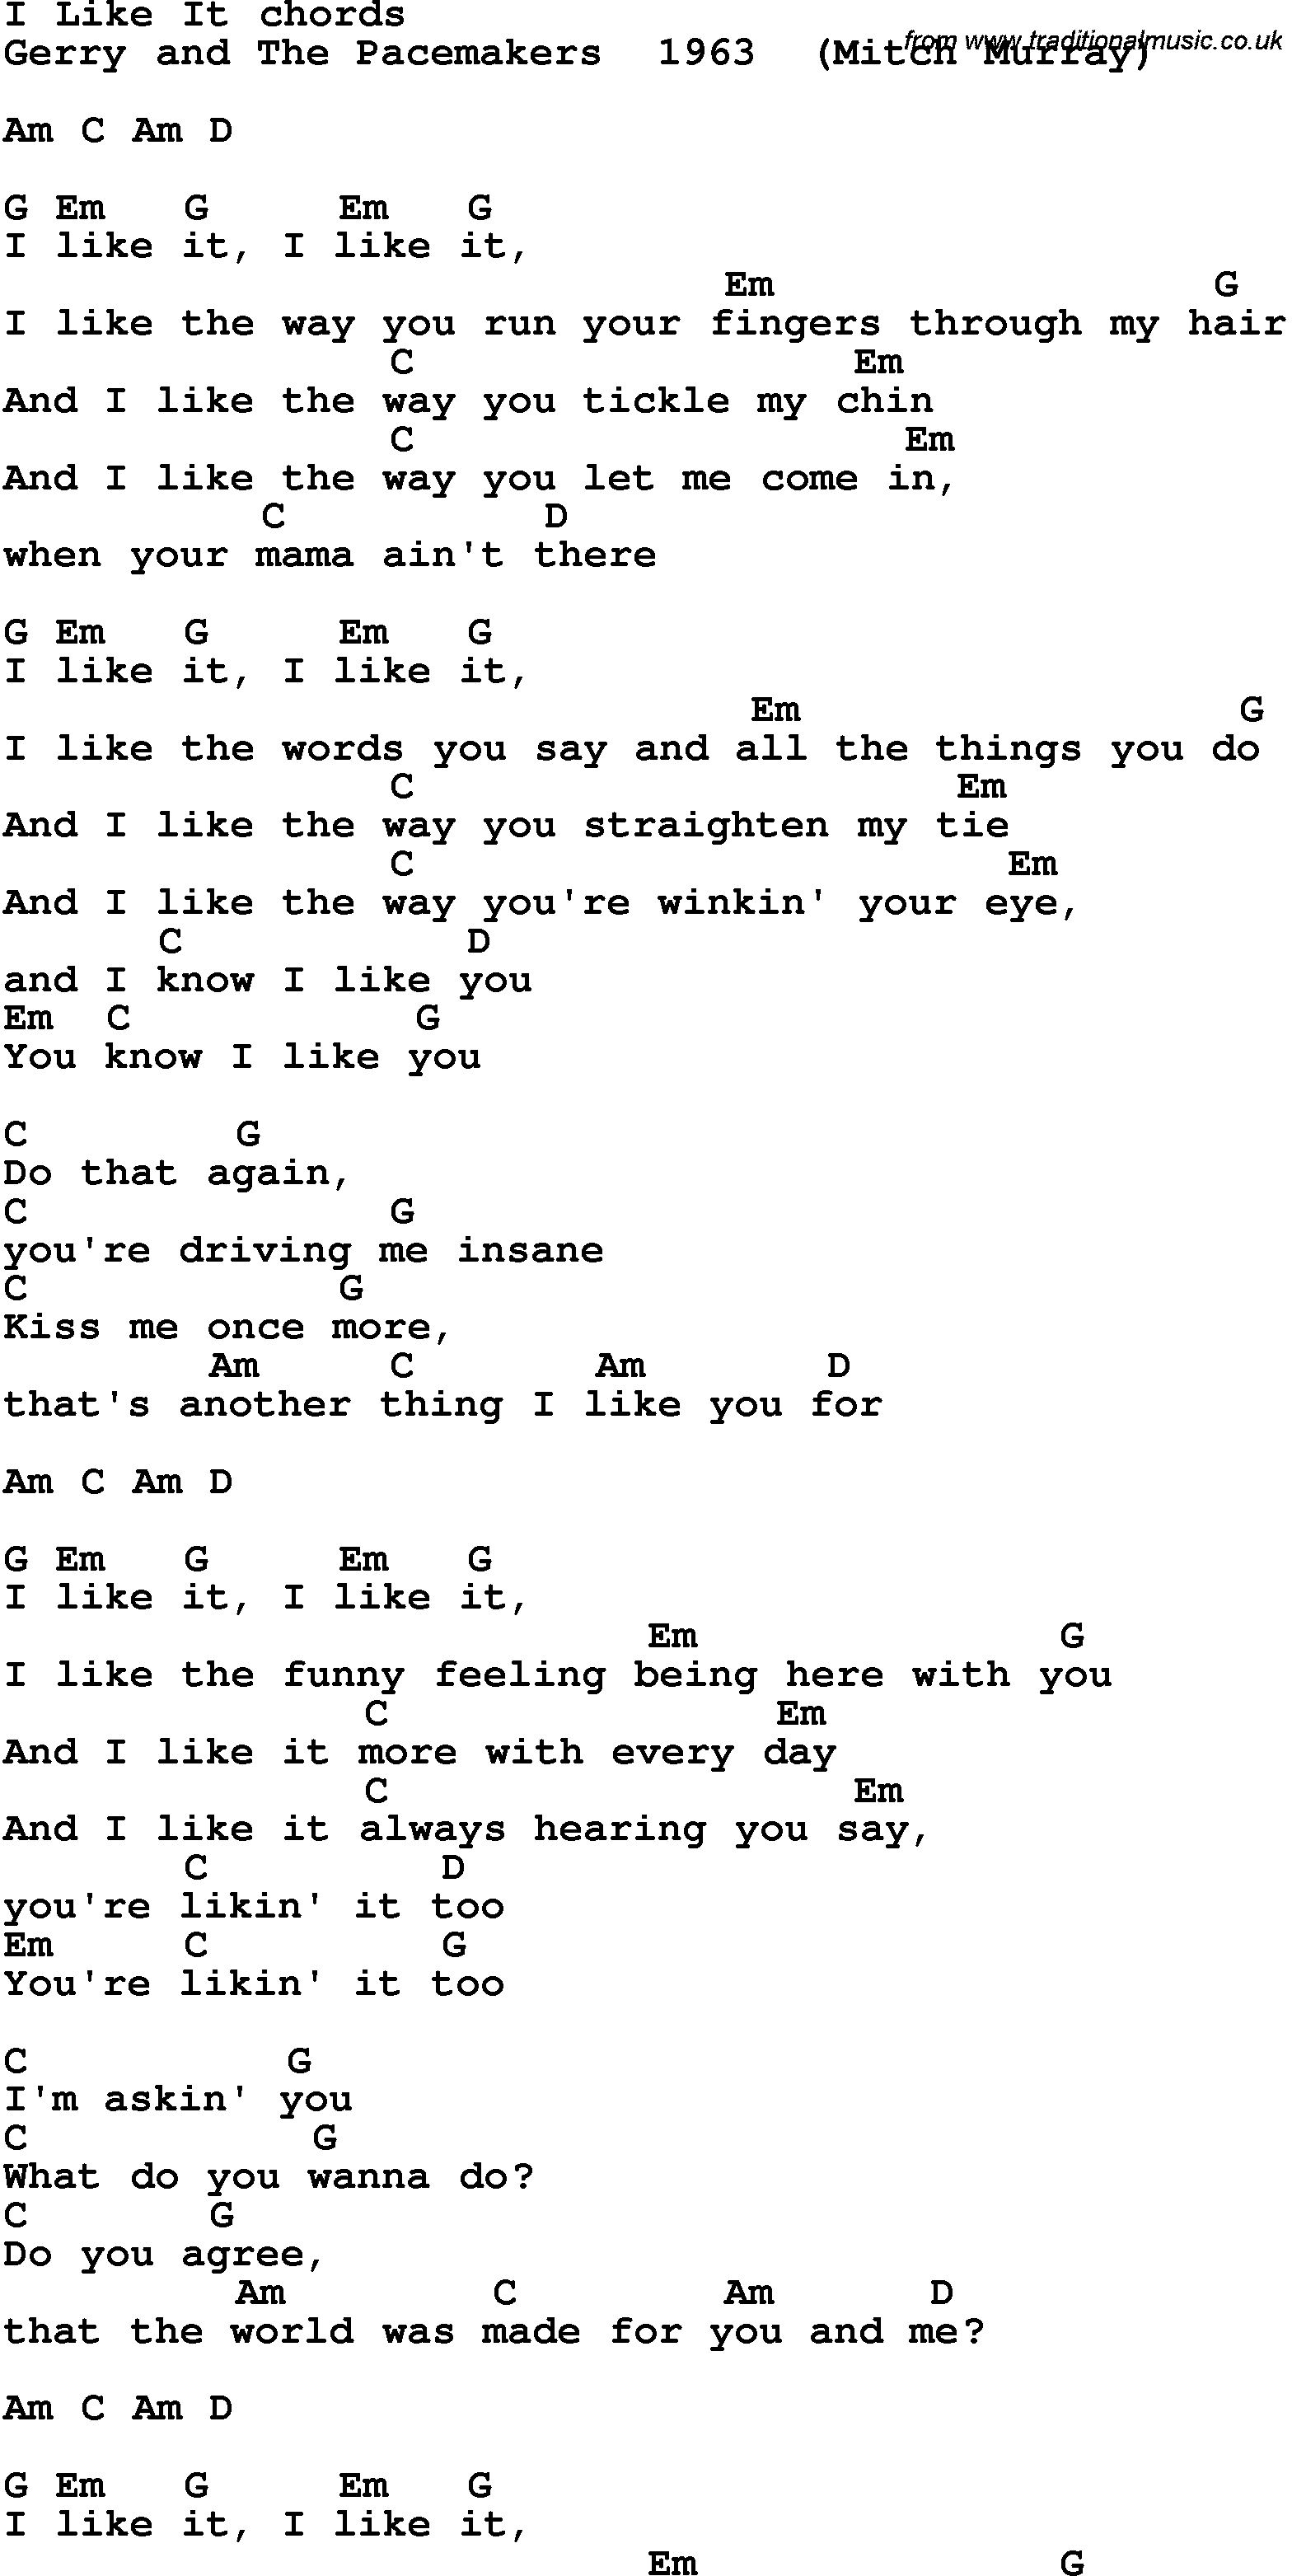 Song Lyrics with guitar chords for I Like It